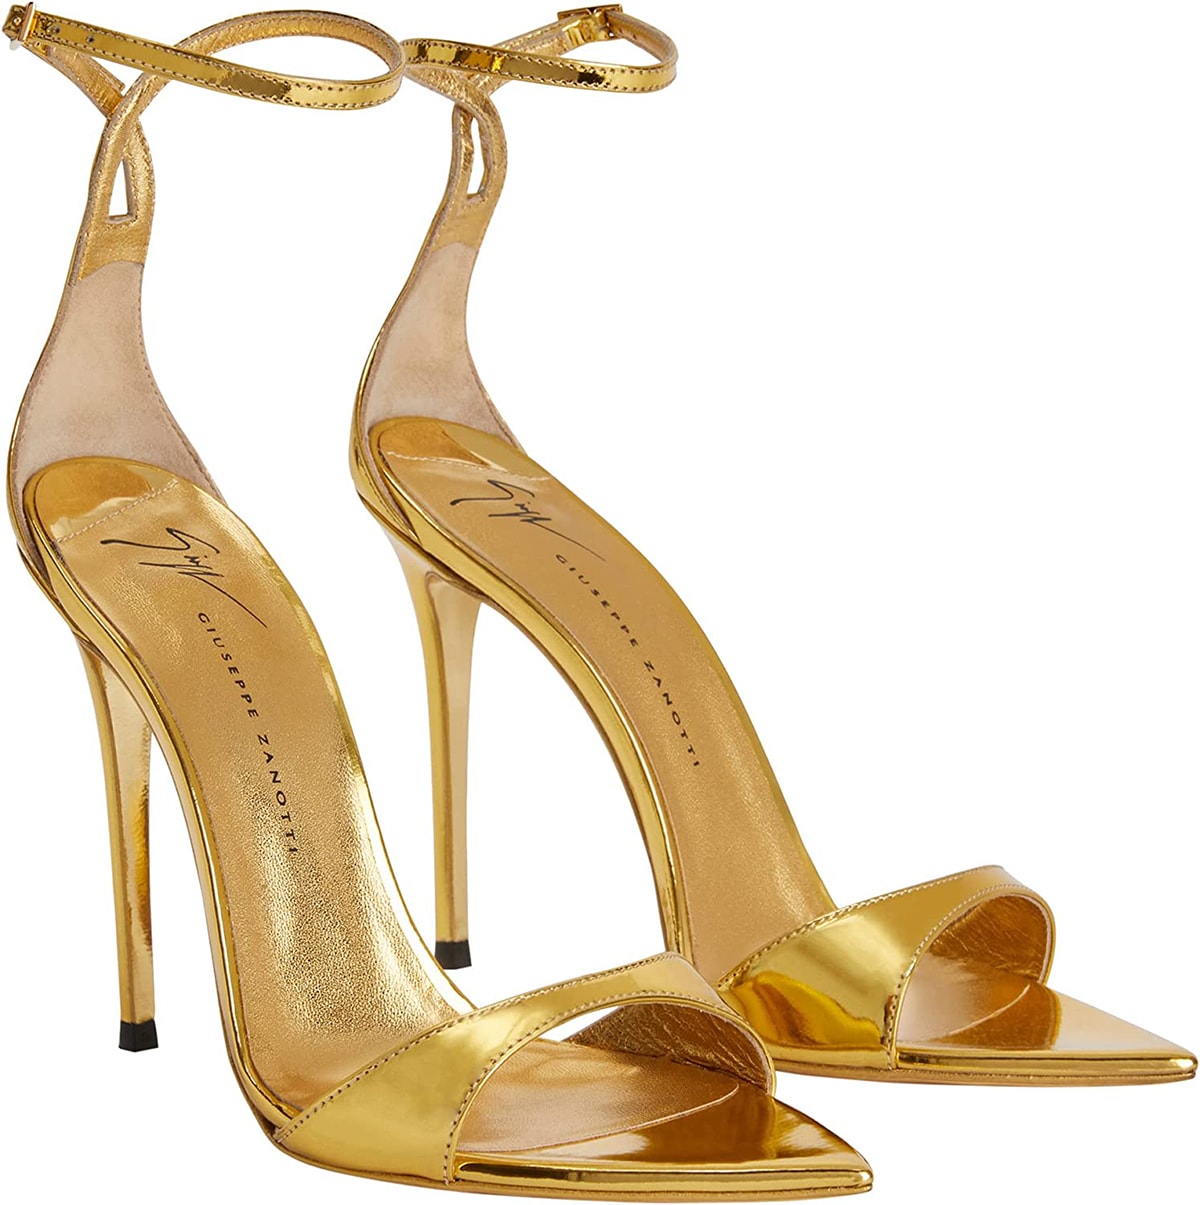 The Giuseppe Zanotti Intriigo sandals have open pointed toes, delicate crossed straps, and high stiletto heels